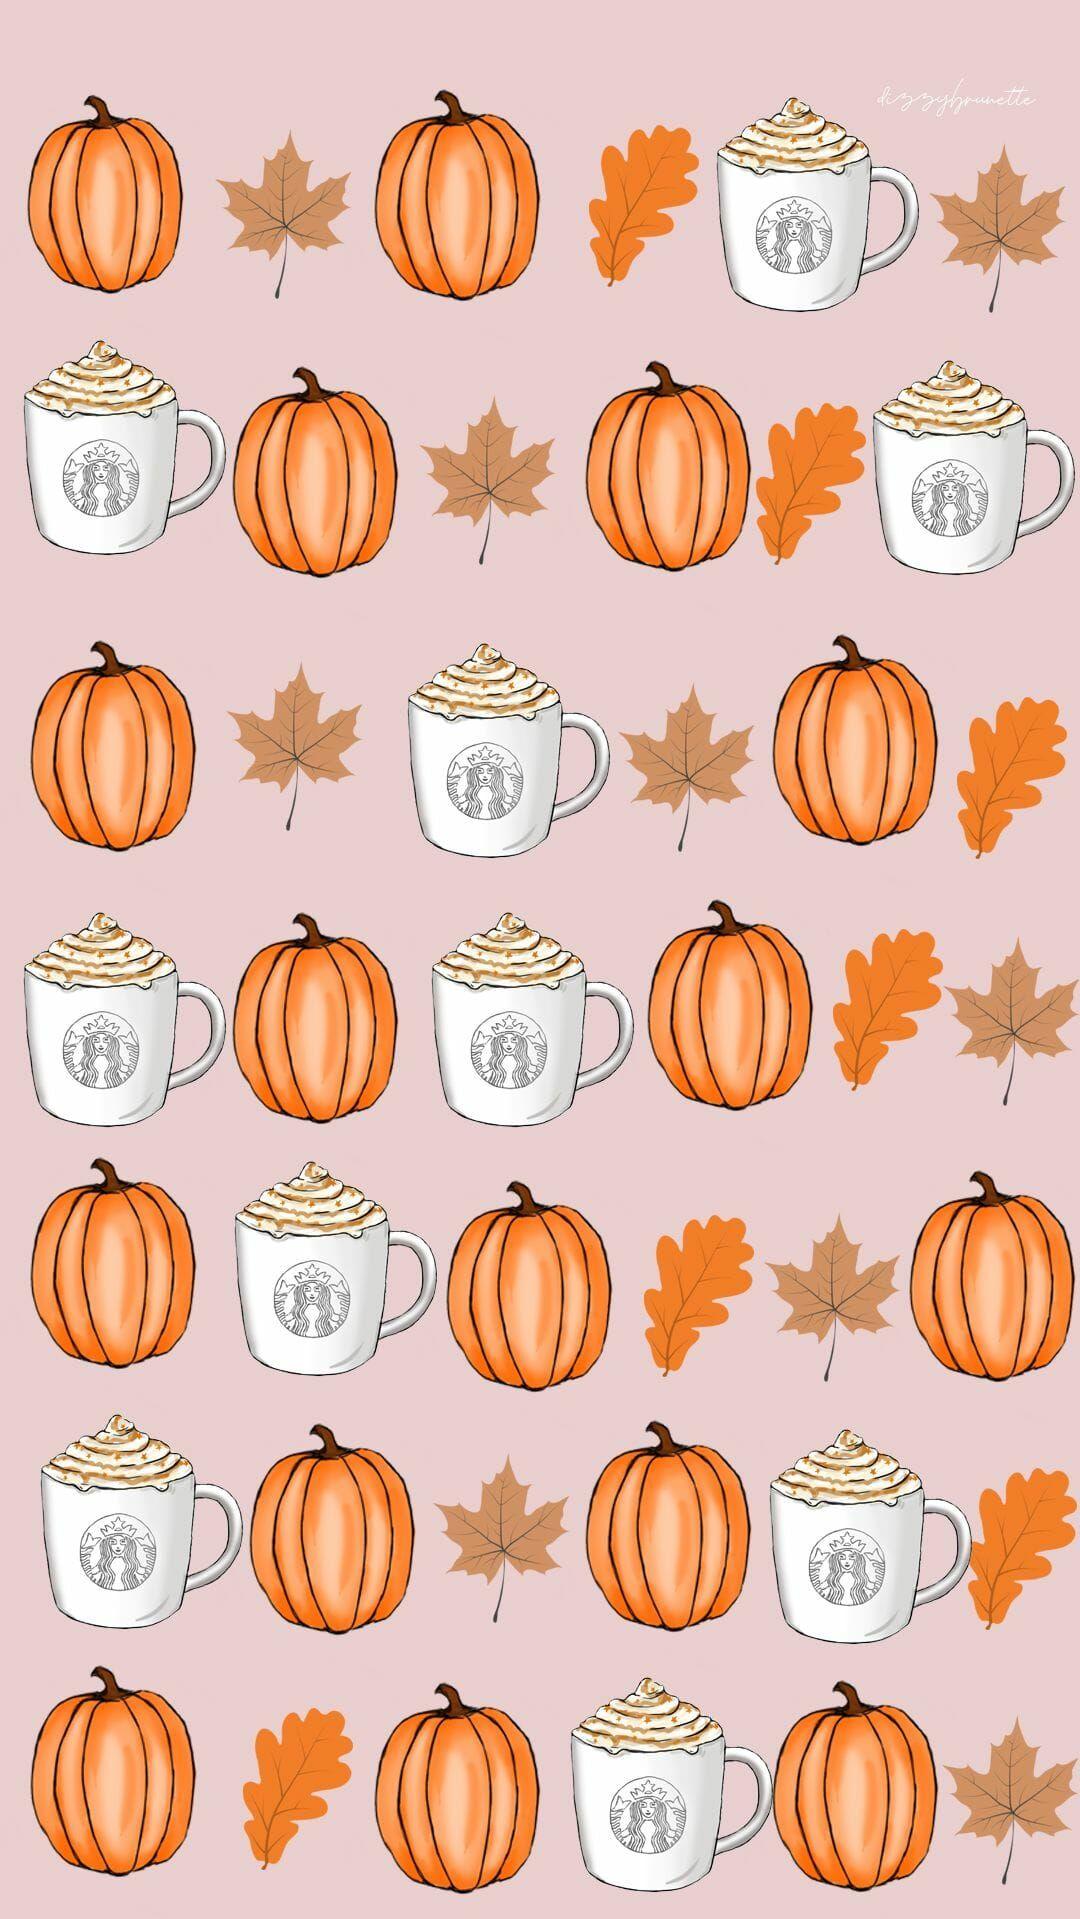 50 Free Amazing Fall Wallpapers For iPhone Iphone wallpaper fall